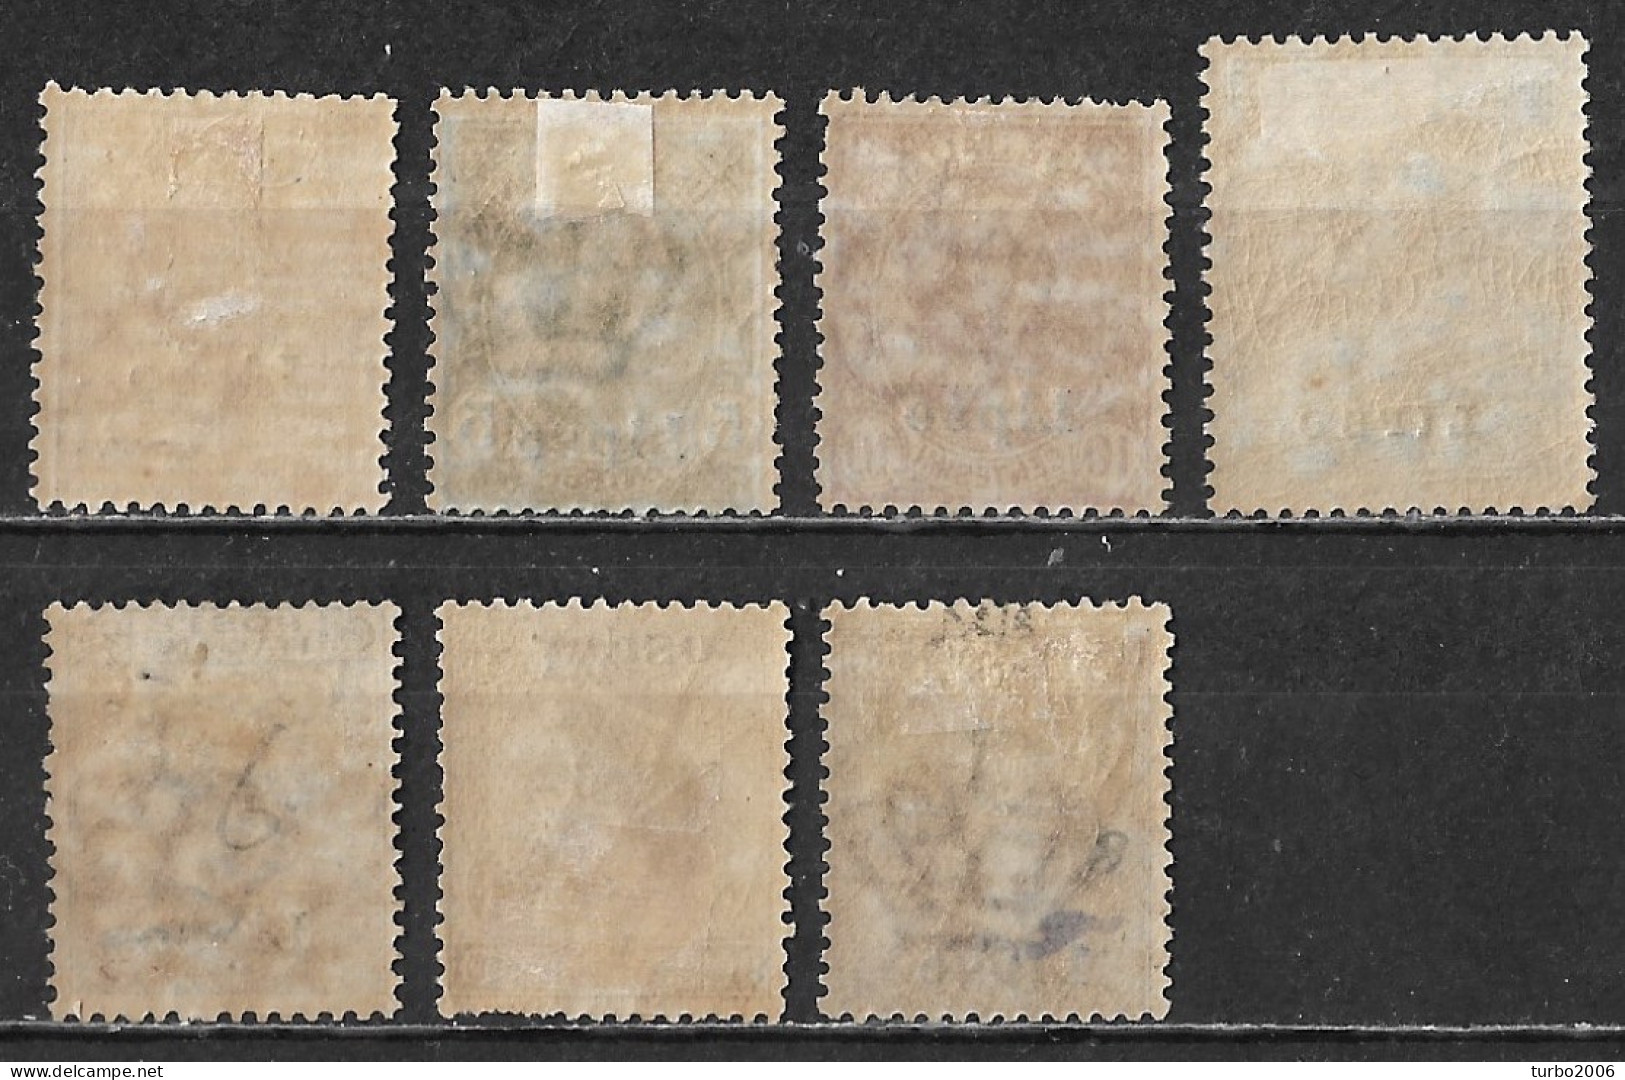 DODECANESE 1912 Italian Stamps With Black Overprint LIPSO Complete MH Set Vl. 1 / 7 - Dodecaneso